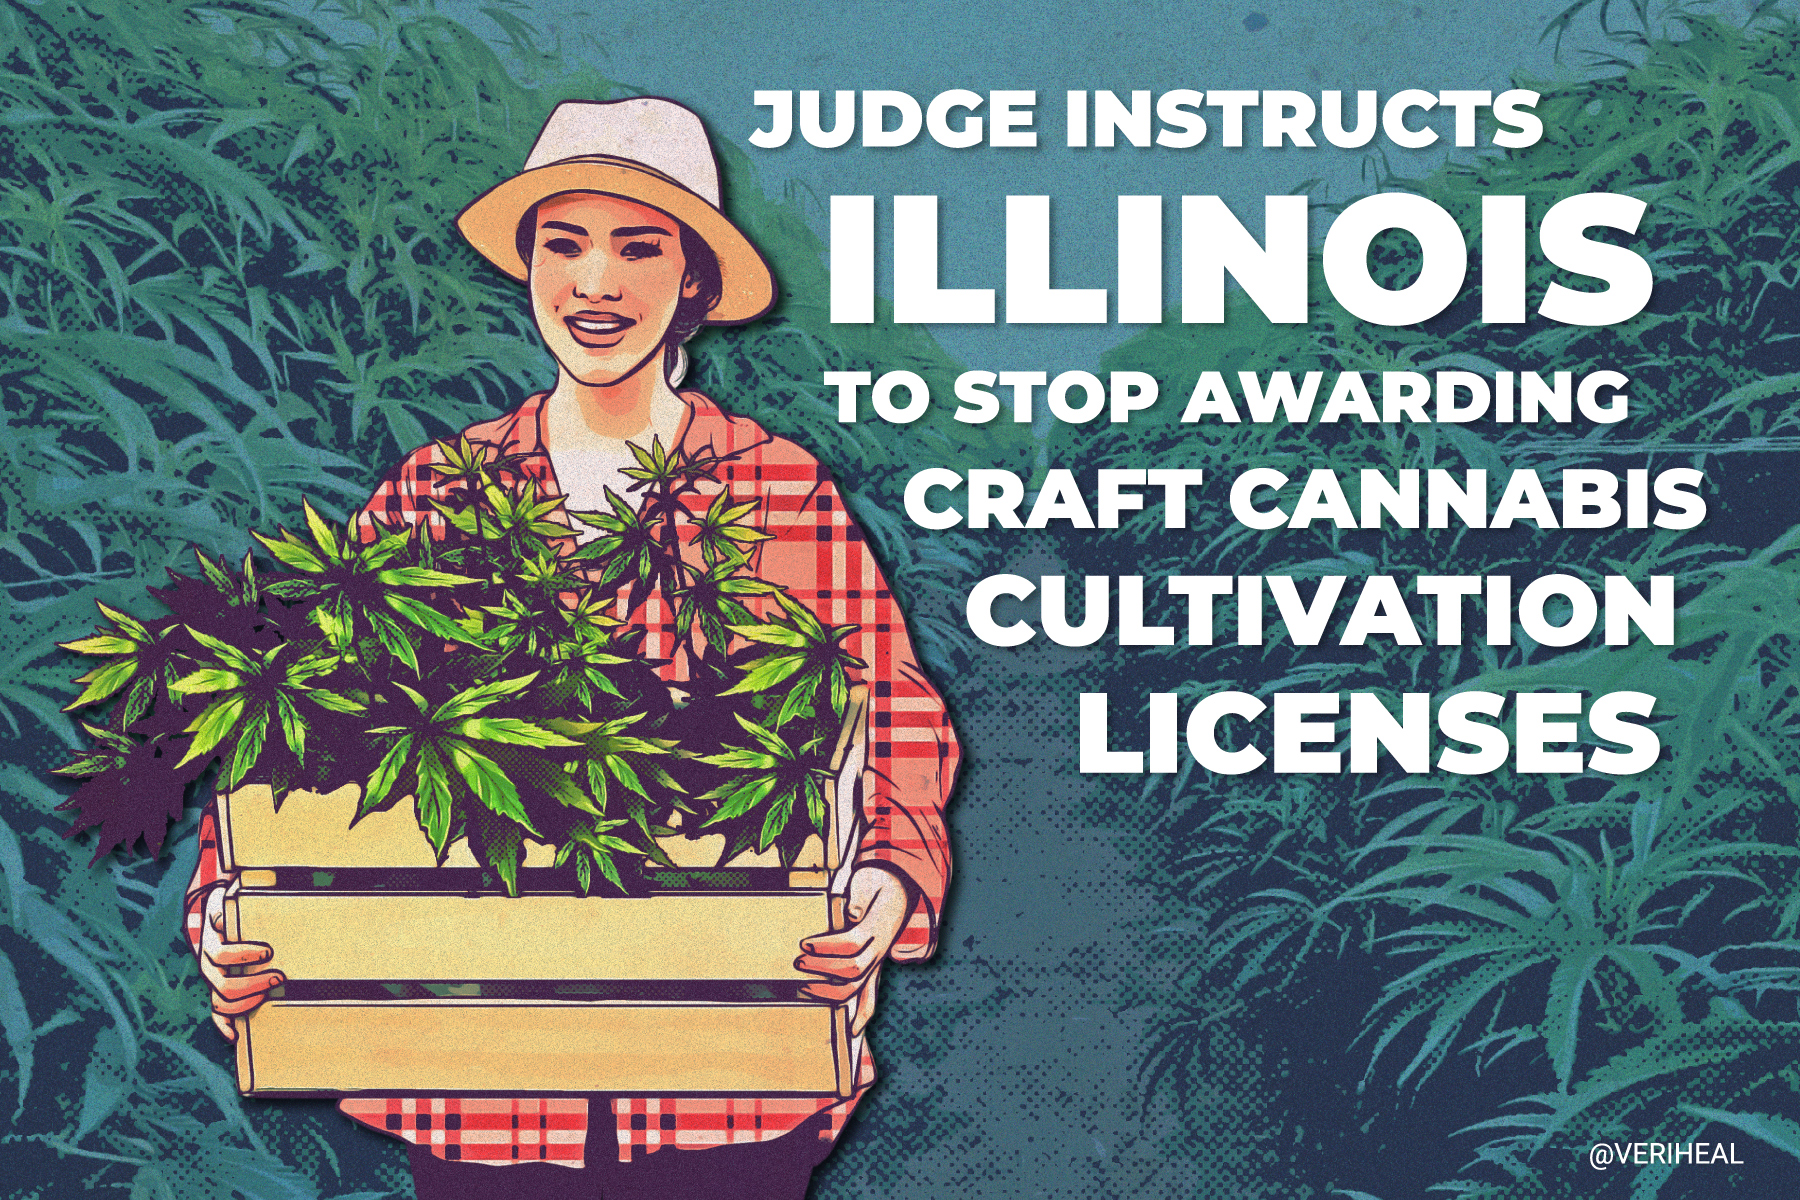 Judge Instructs Illinois to Stop Awarding Adult-Use Craft Cannabis Cultivation Licenses